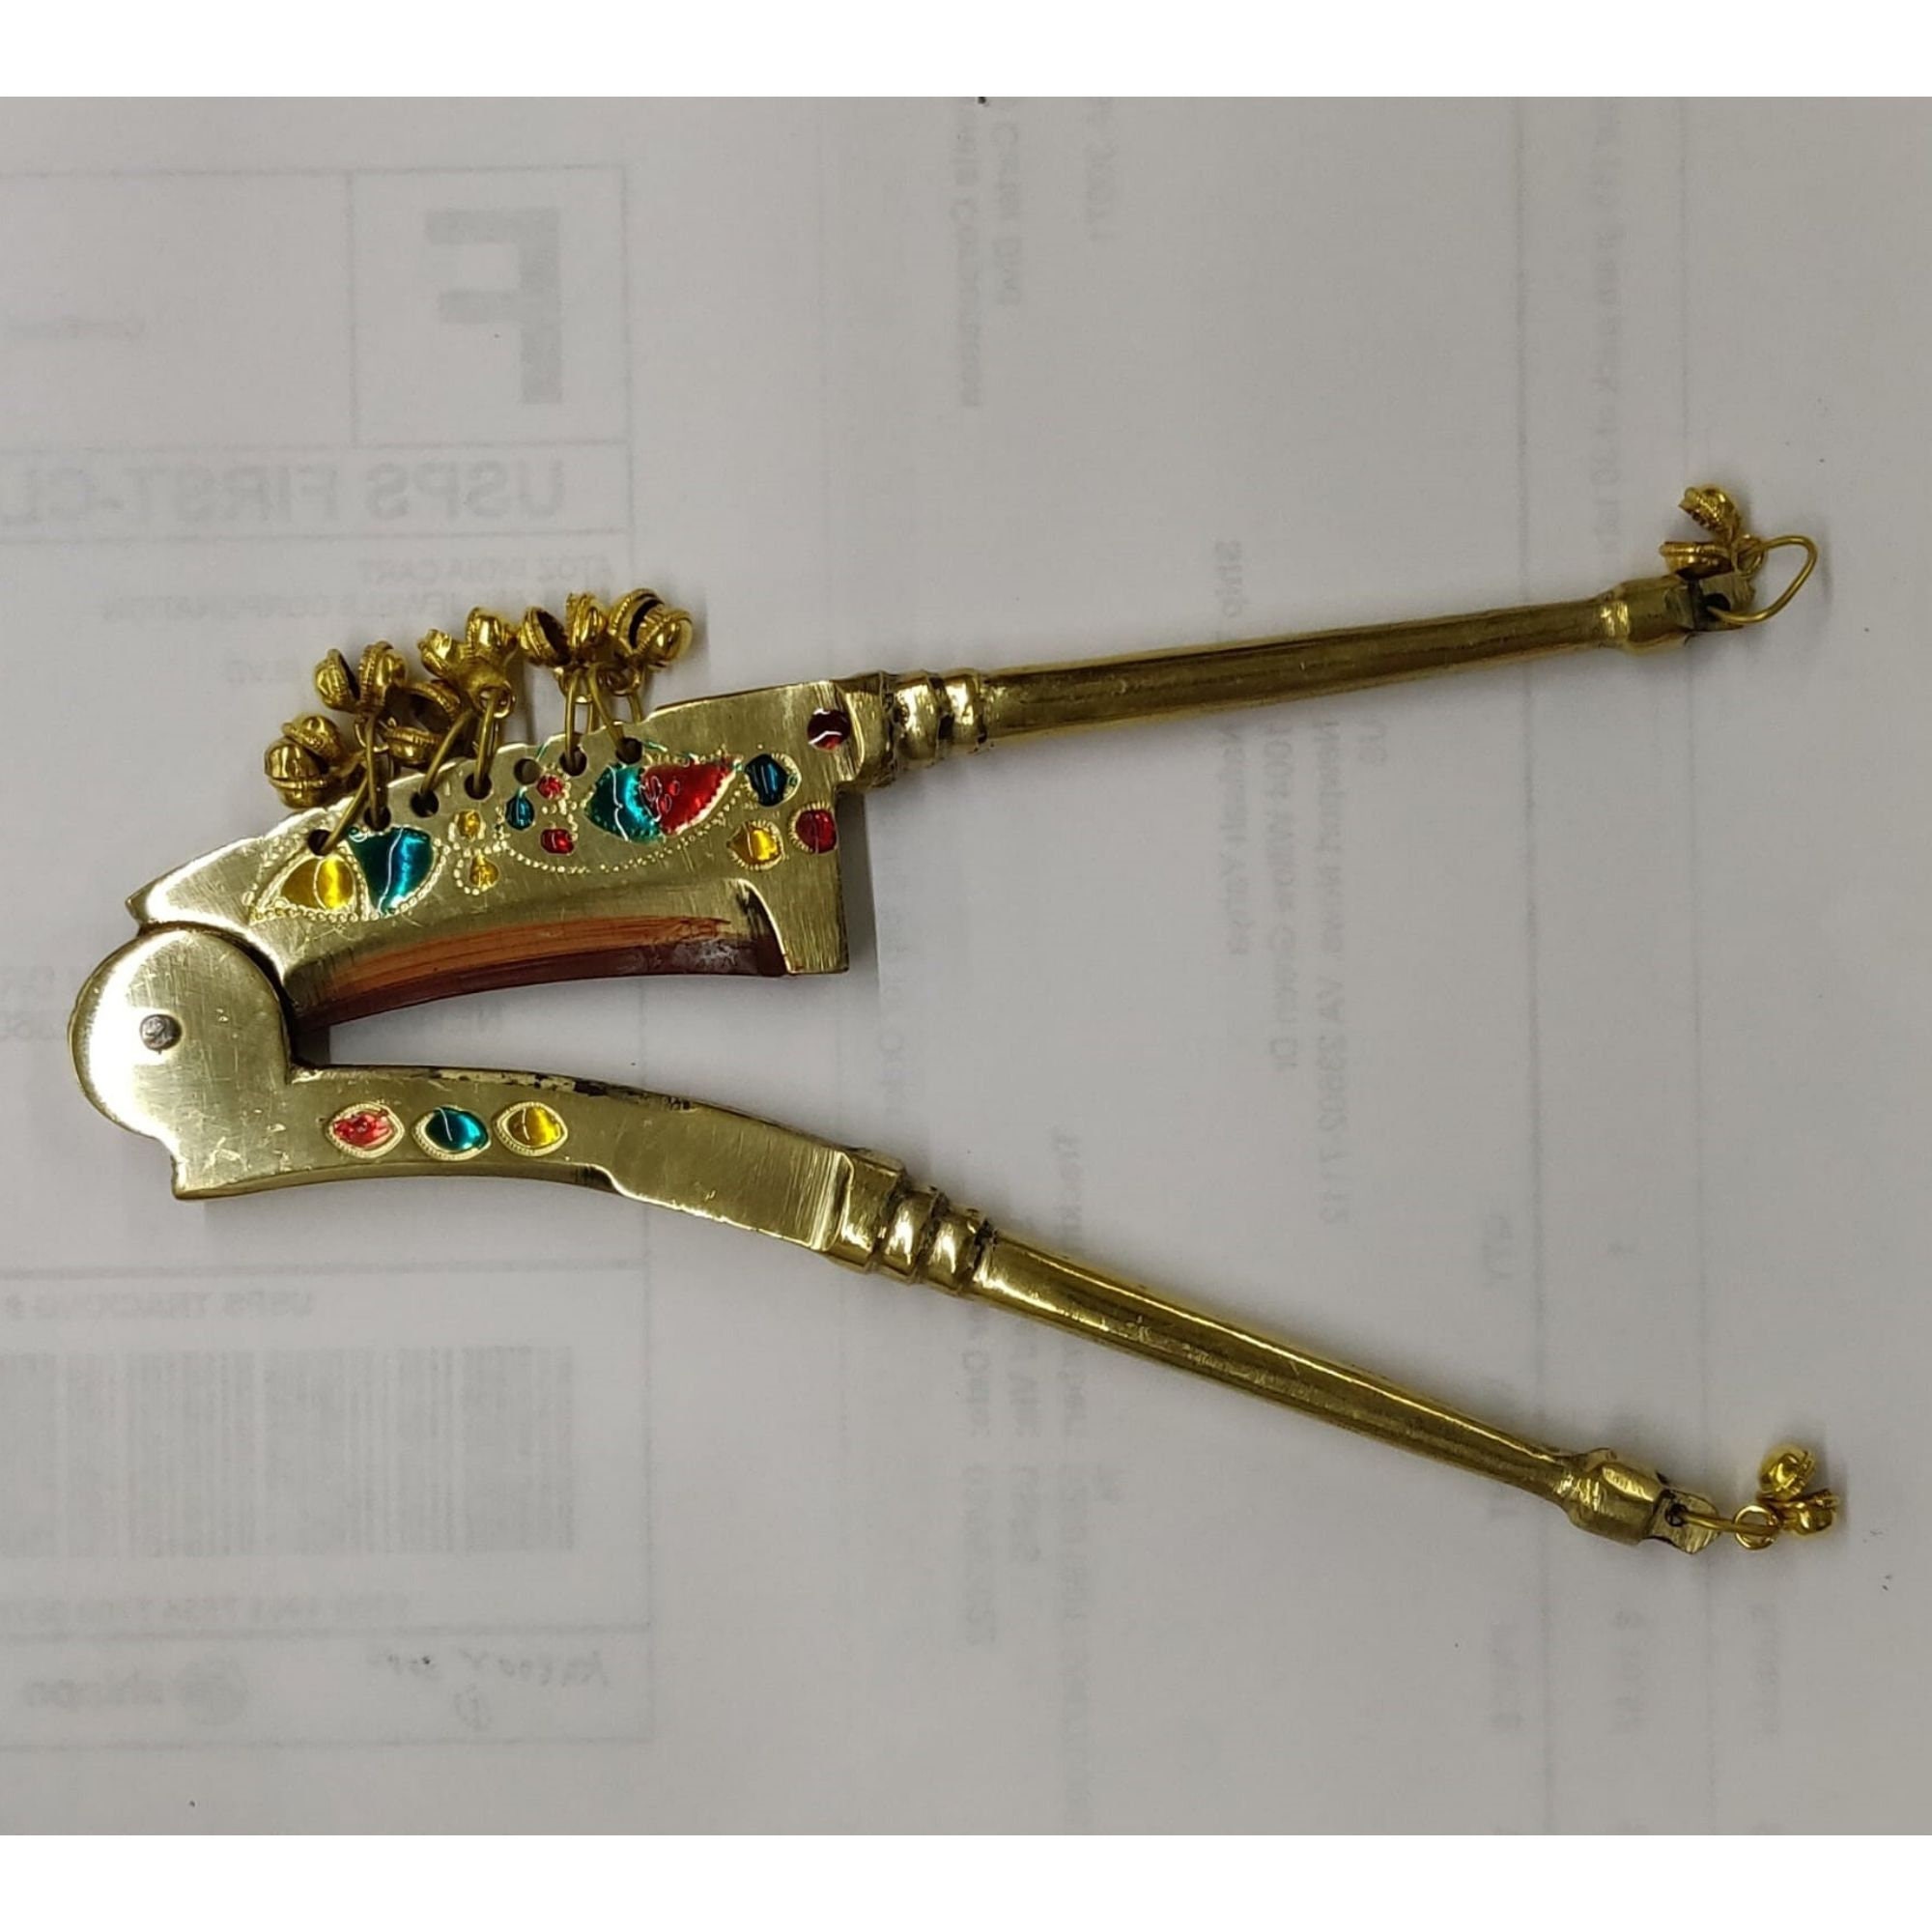 Vintage Brass Horse Betel Nut Cutter, South India (item #1396290)